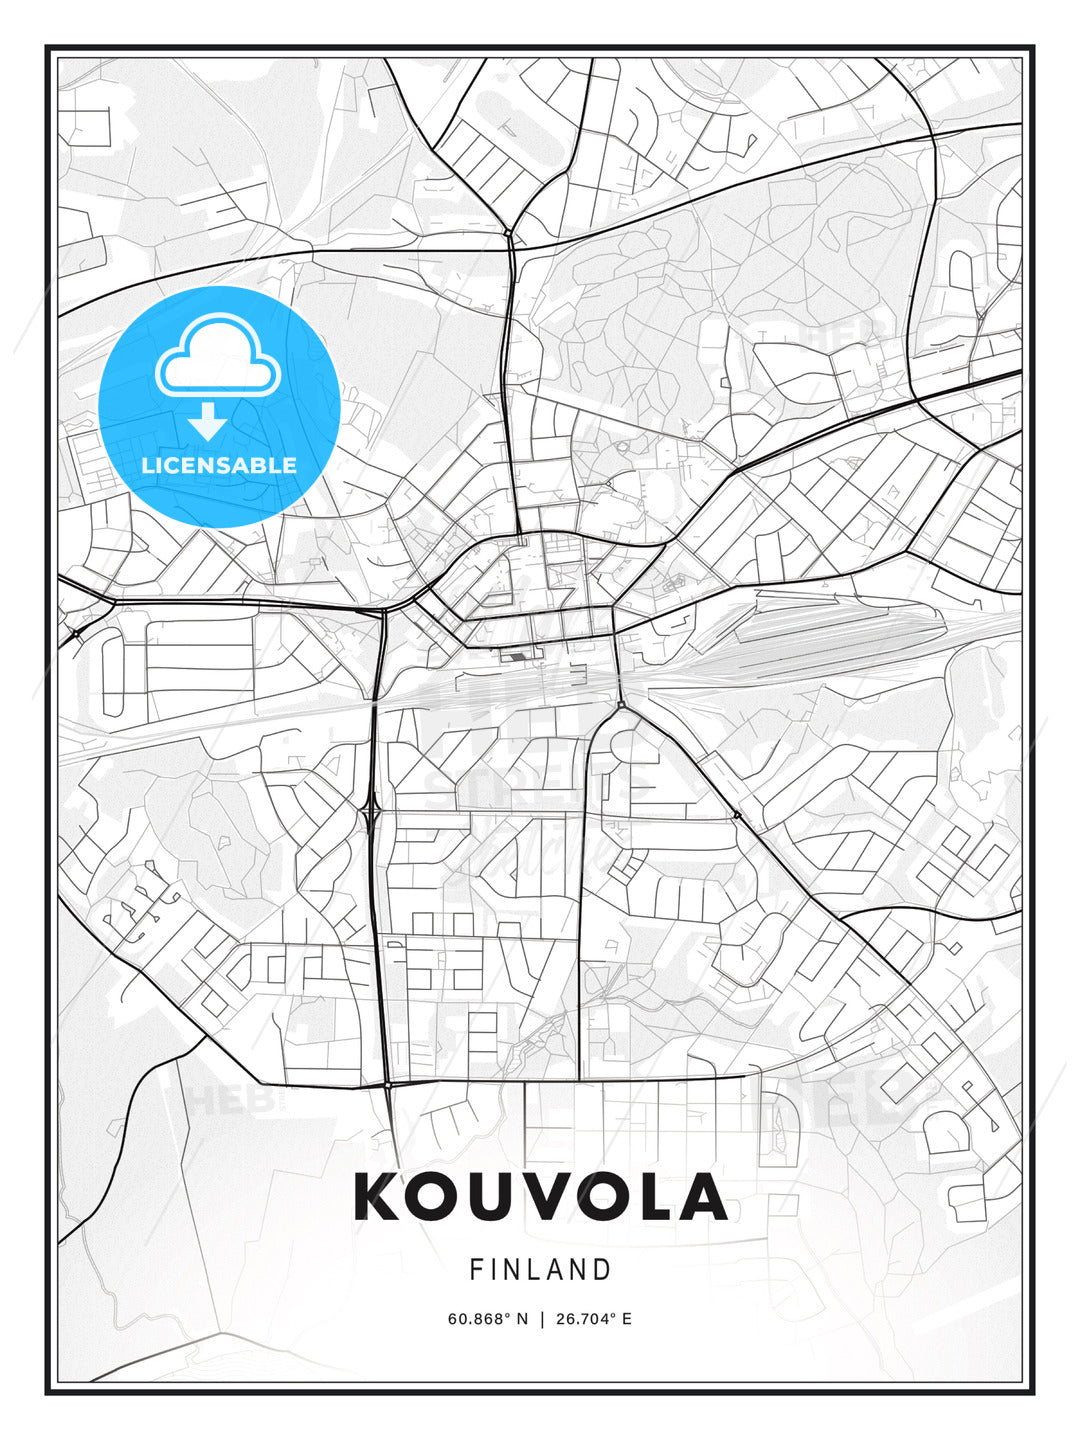 Kouvola, Finland, Modern Print Template in Various Formats - HEBSTREITS Sketches